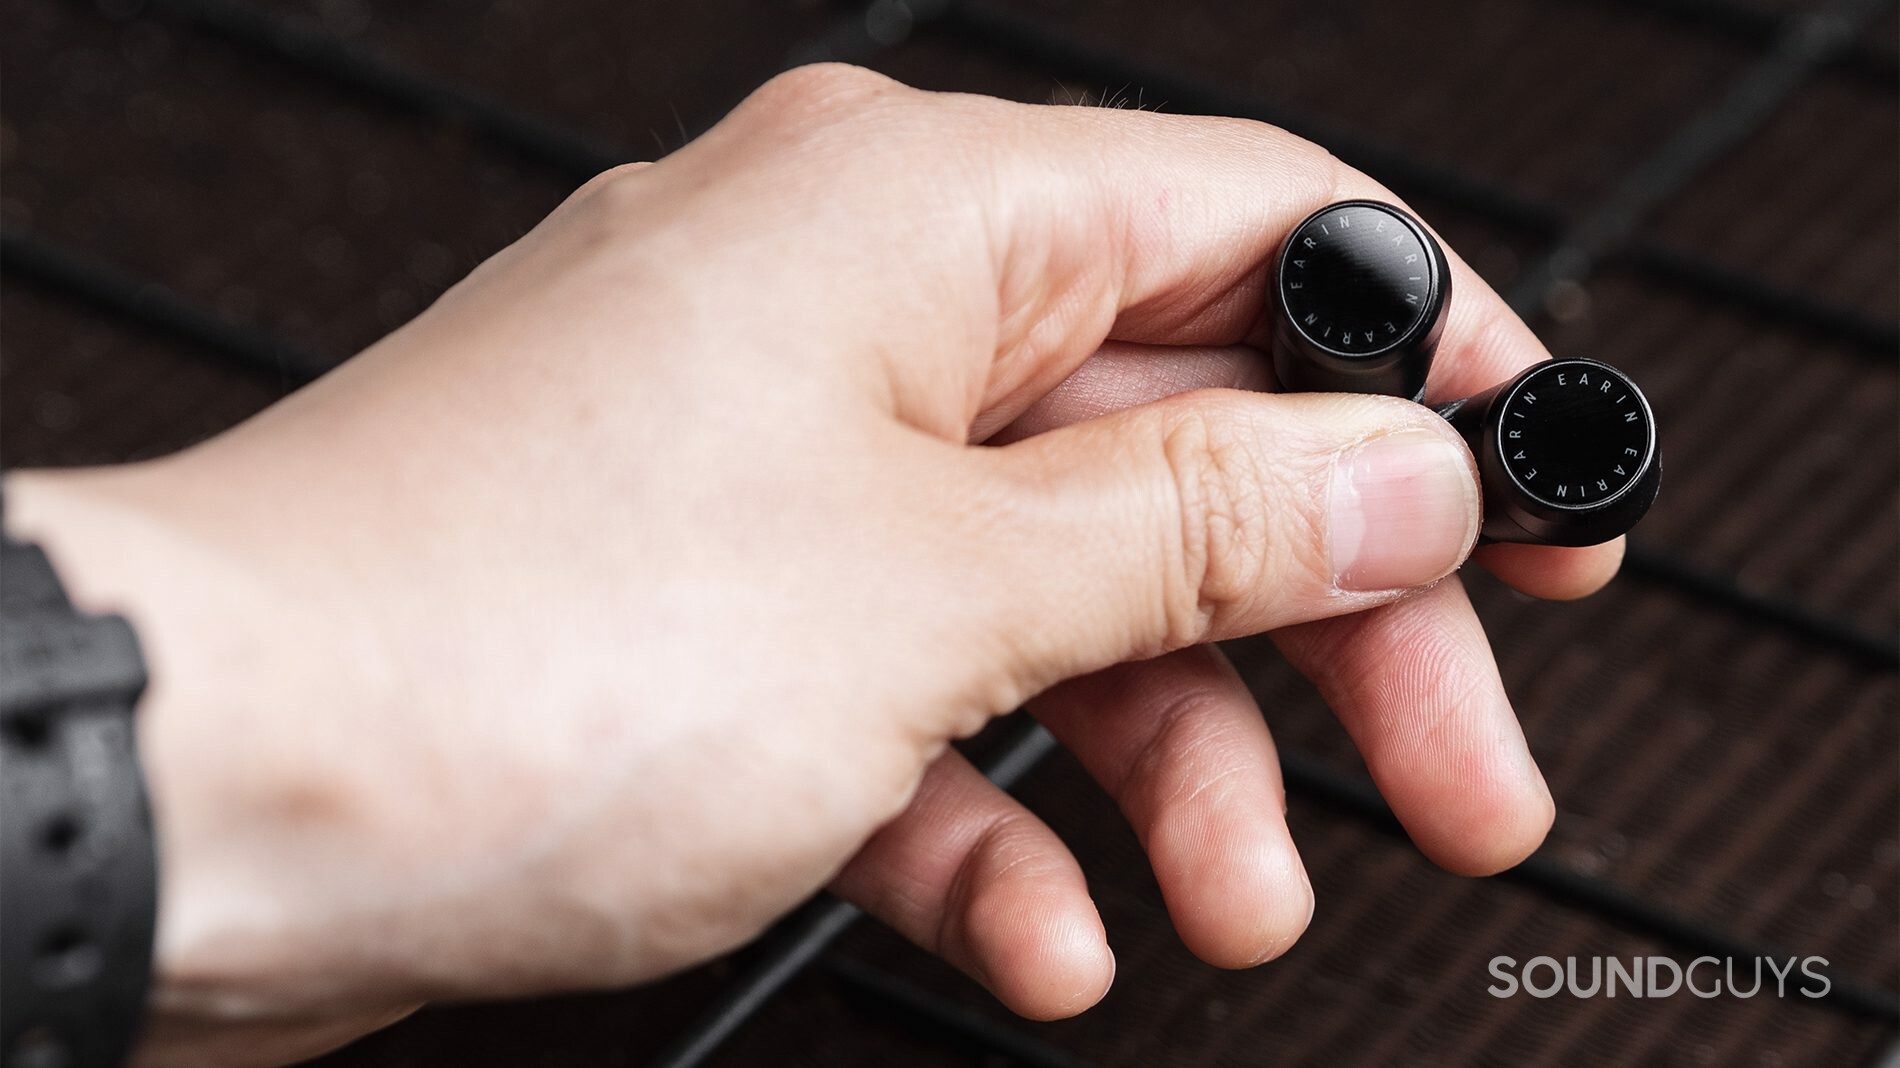 Earin M-2 review: The earbuds are in the hand, showing off the touch control panels.